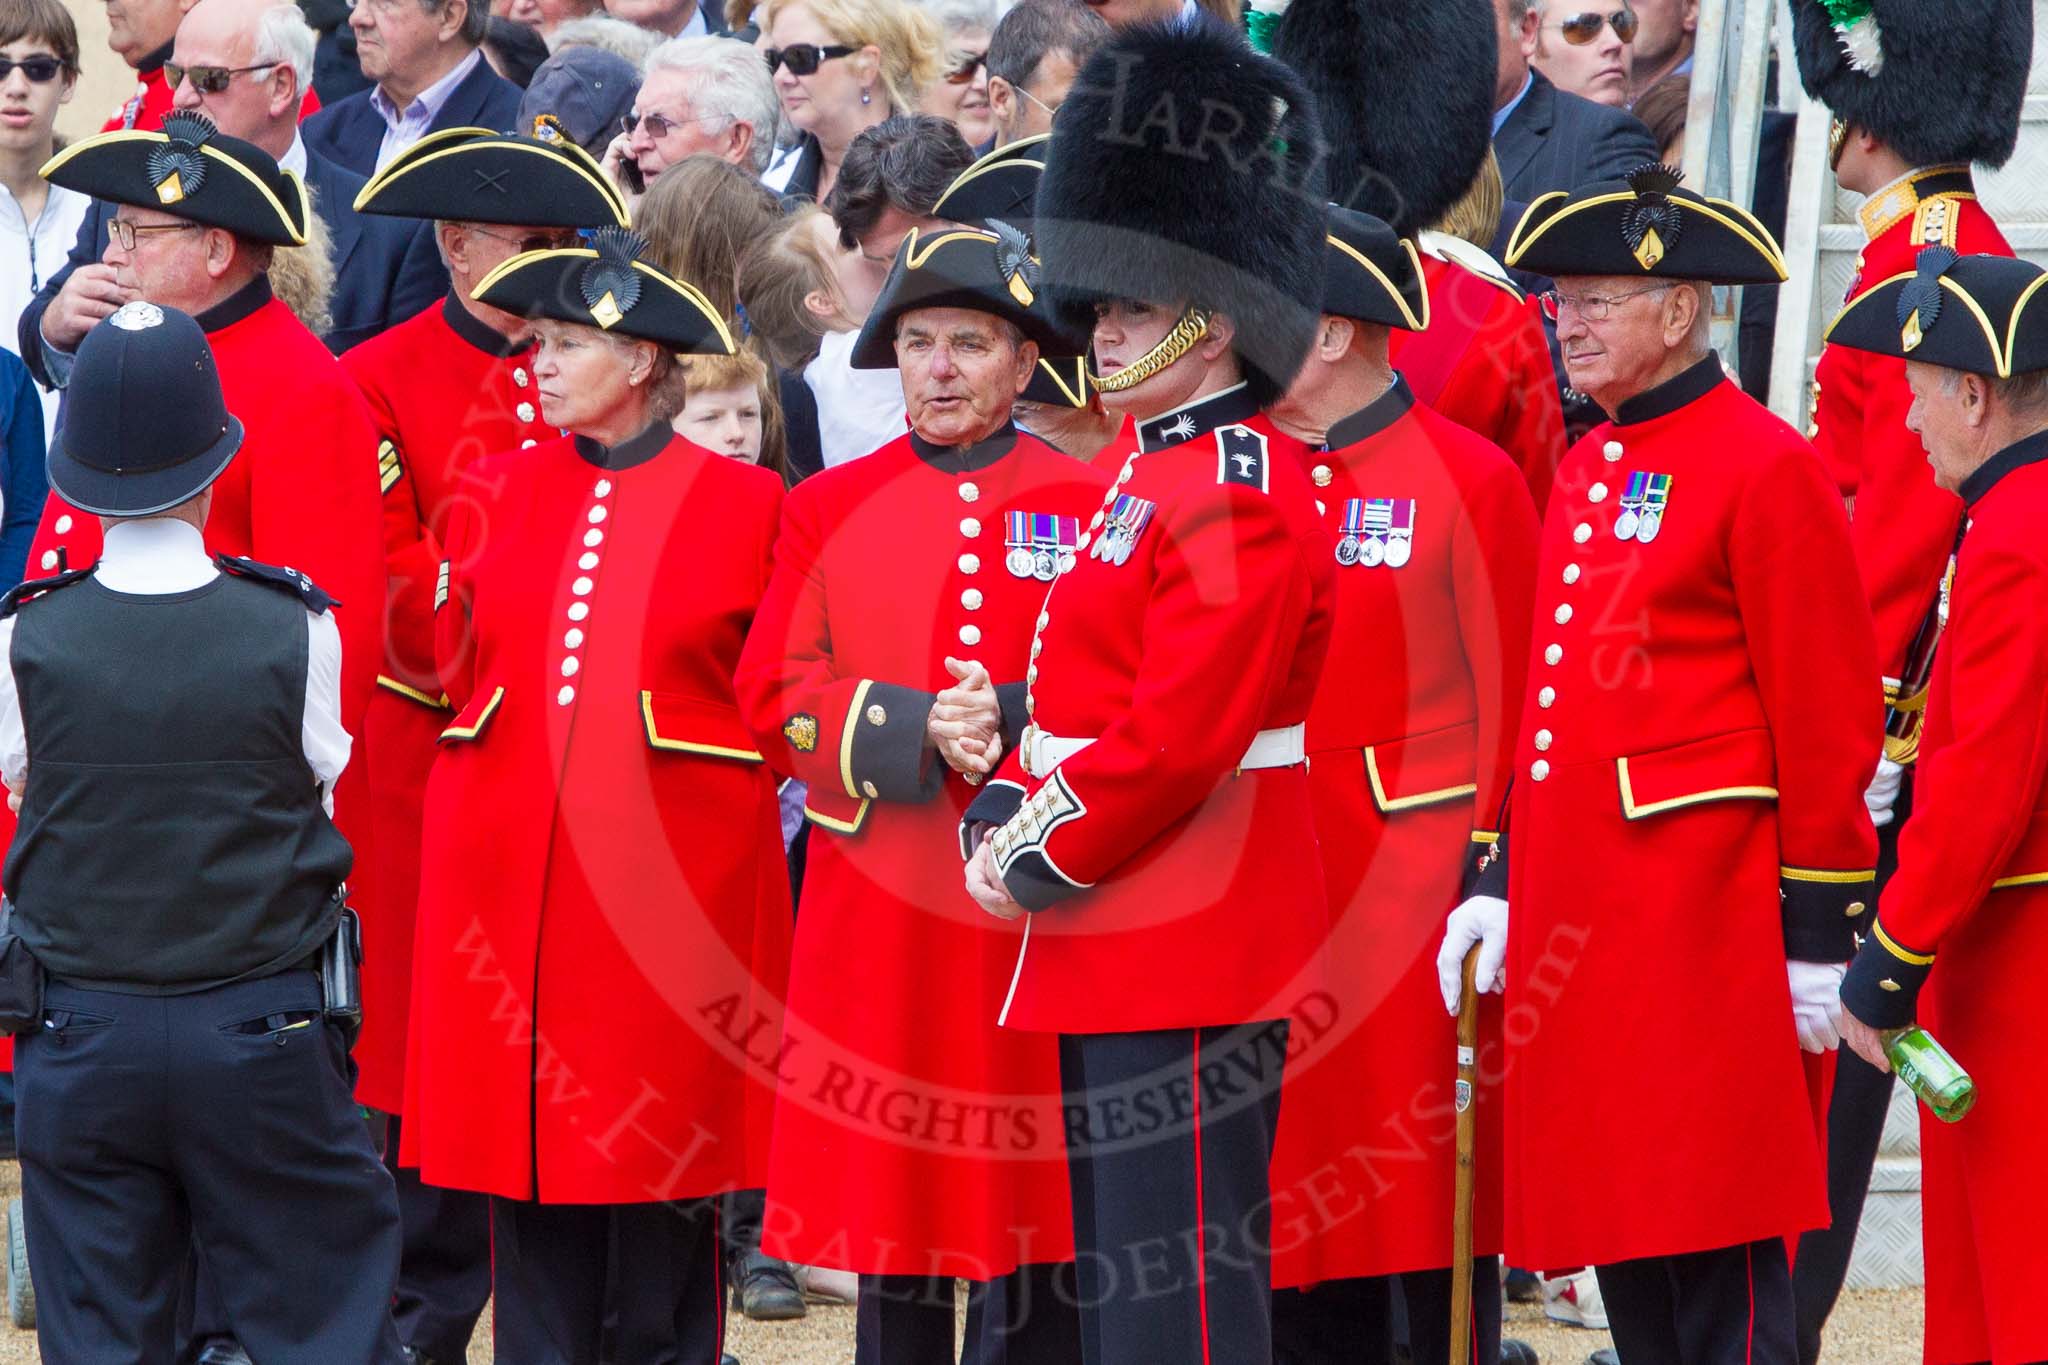 The Colonel's Review 2013.
Horse Guards Parade, Westminster,
London SW1,

United Kingdom,
on 08 June 2013 at 12:14, image #882